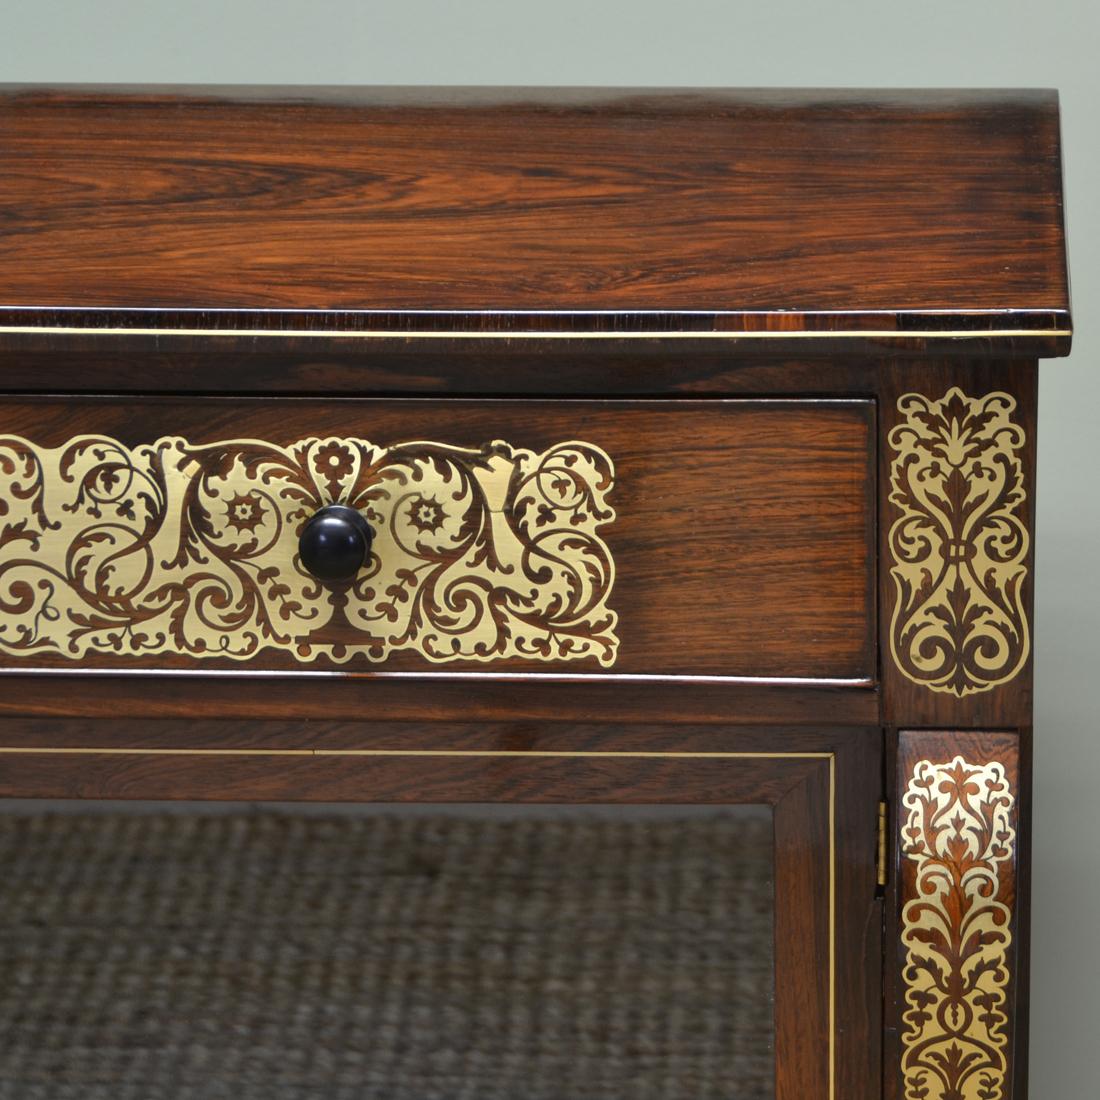 Early 19th Century Regency Rosewood Brass Inlaid Antique Secretaire Cabinet For Sale